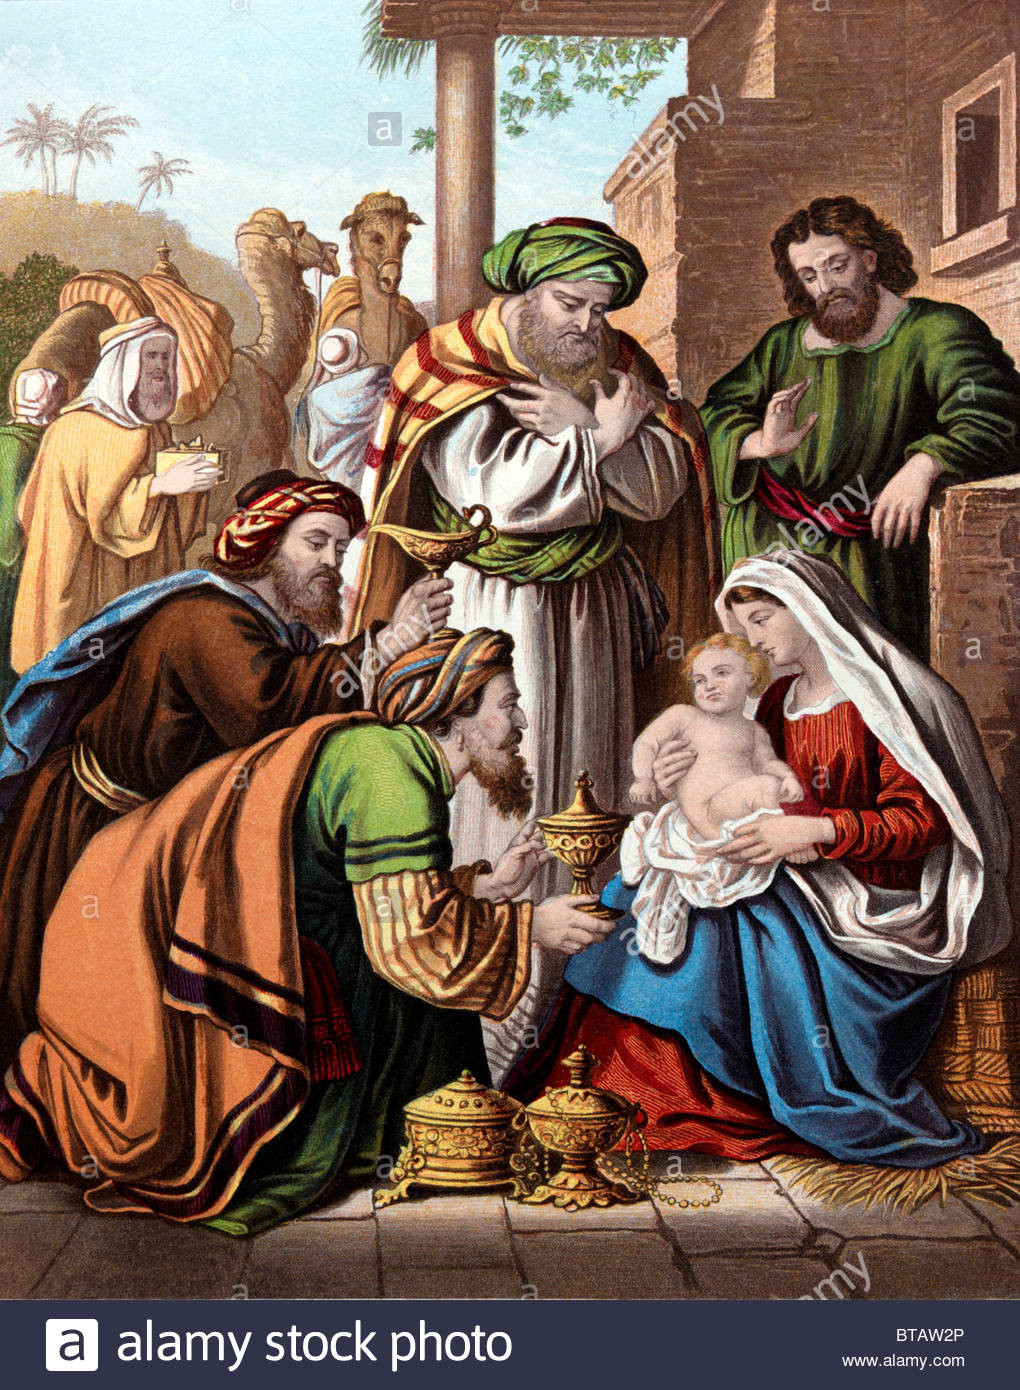 3 Gifts To Baby Jesus
 Painting The Nativity Three Wise Men Bearing Gifts For